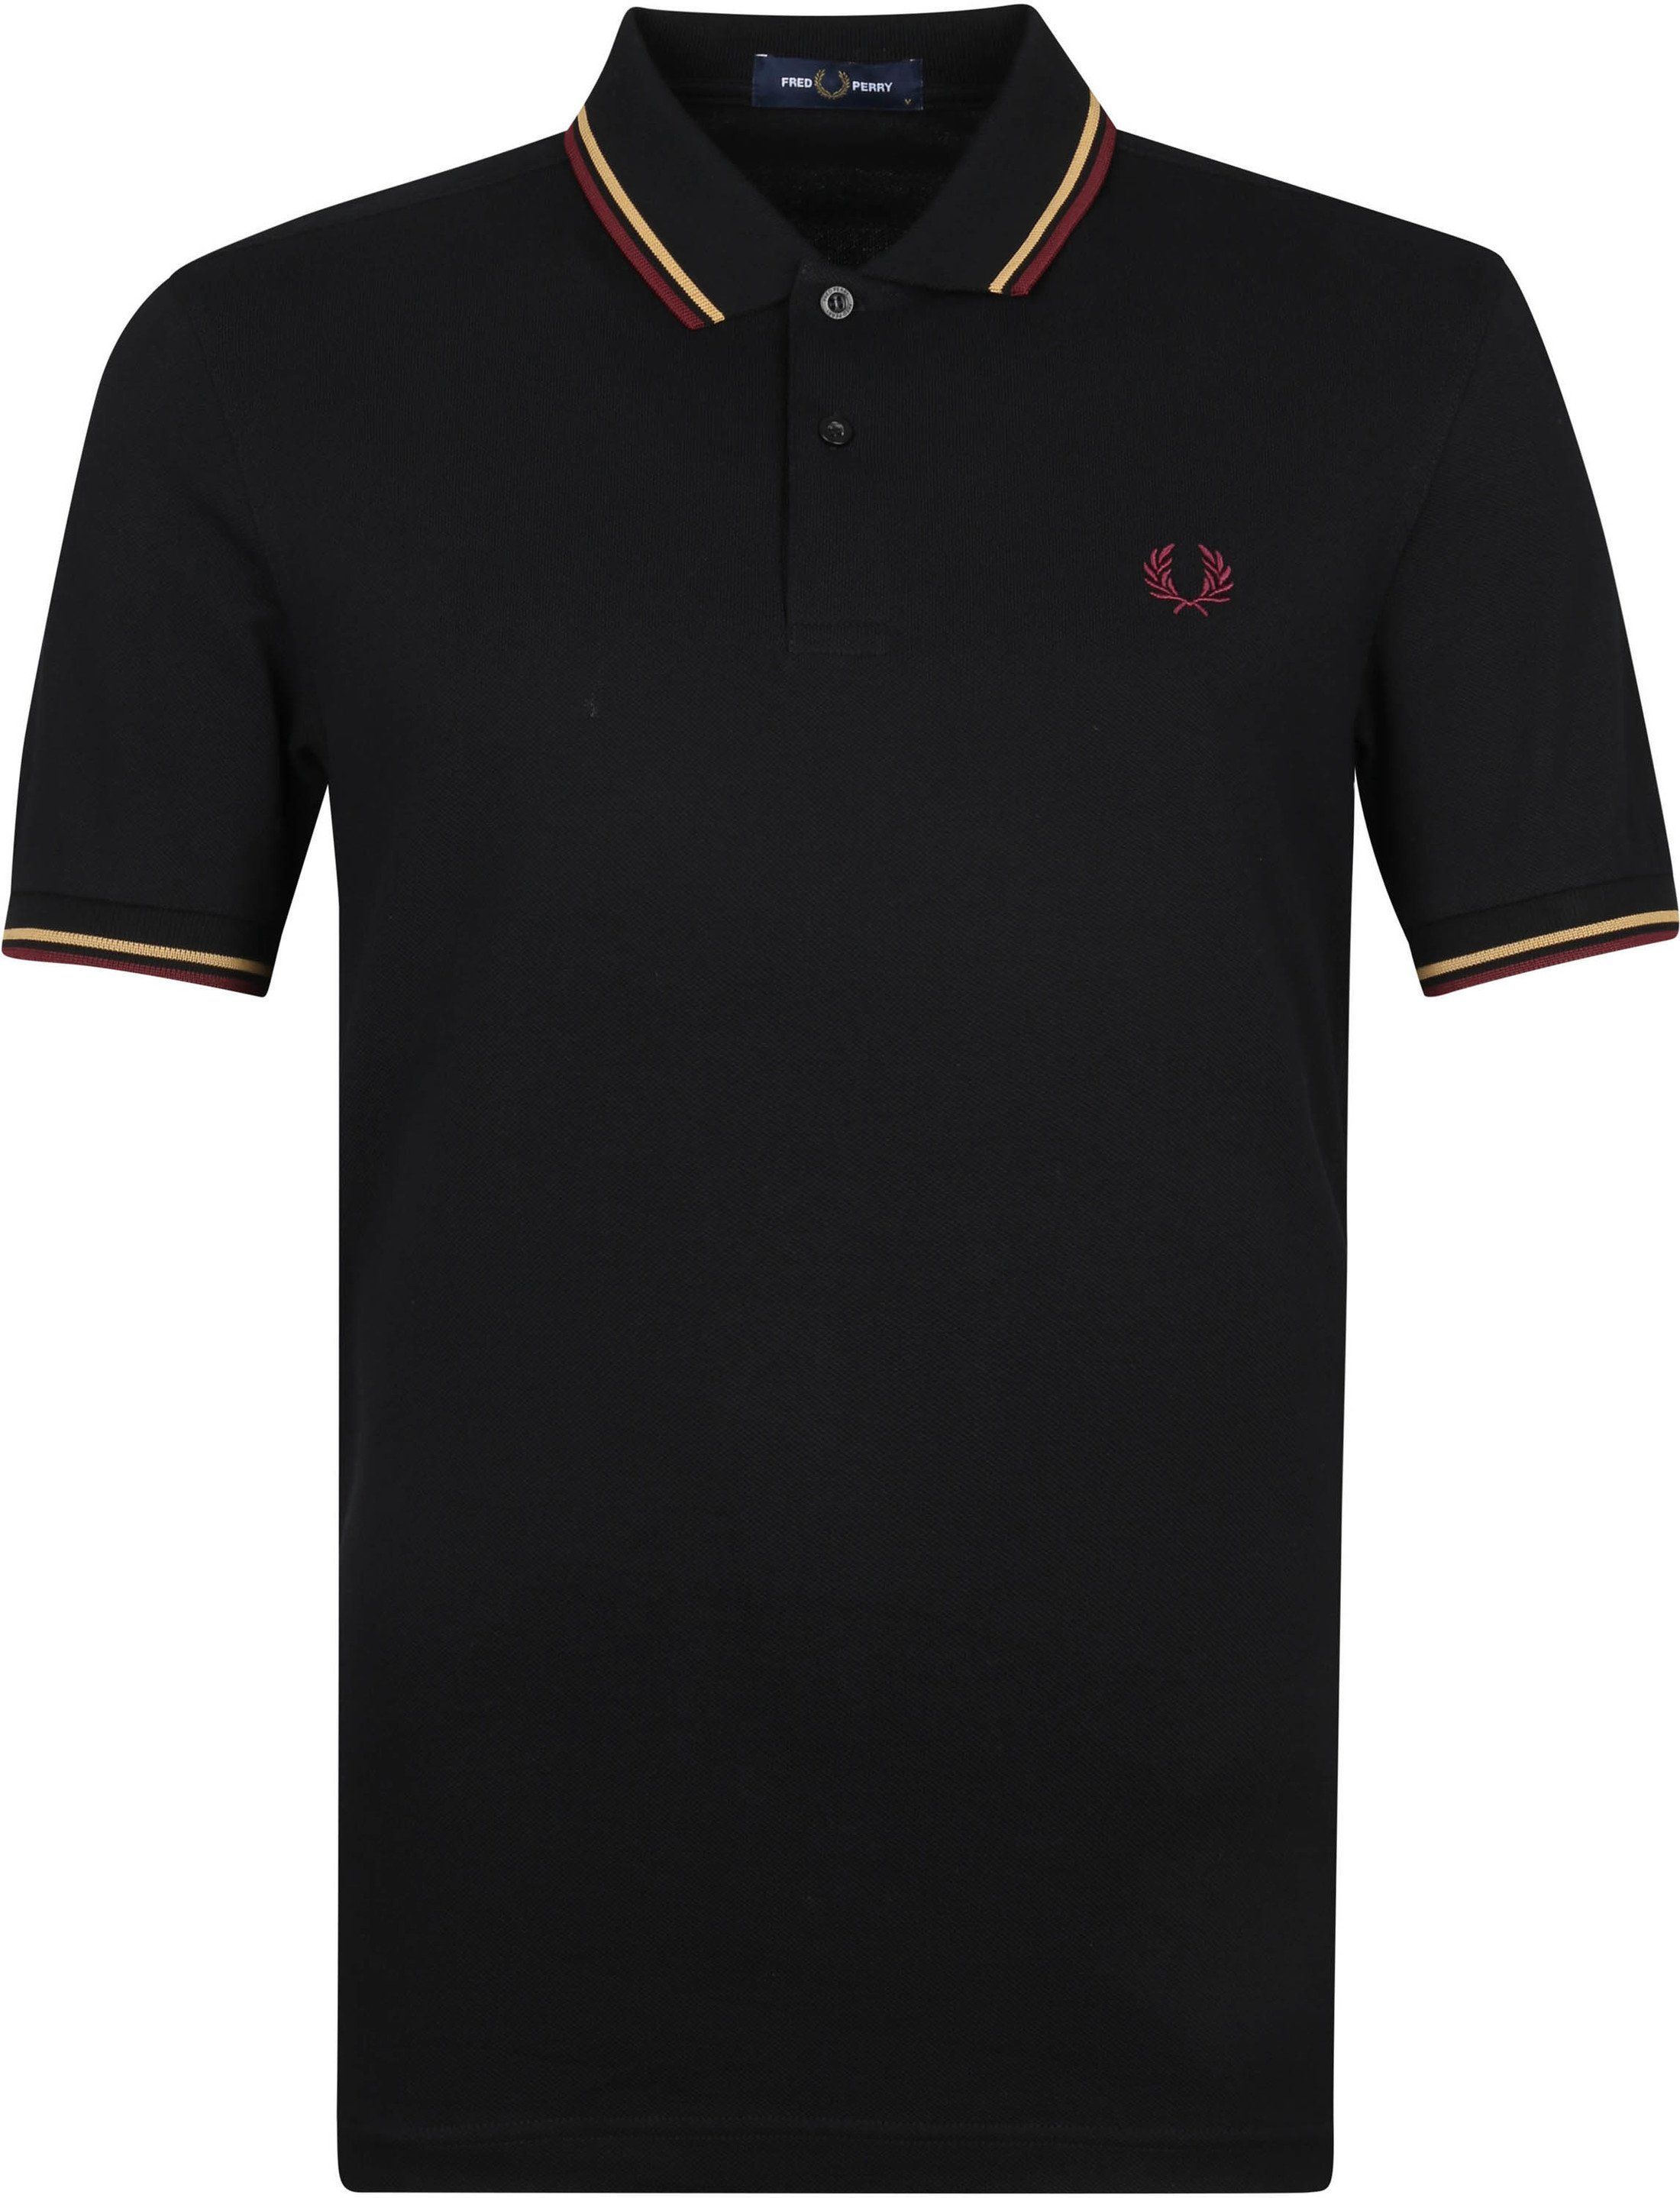 Fred Perry Polo Shirt M3600 Purple Black size M